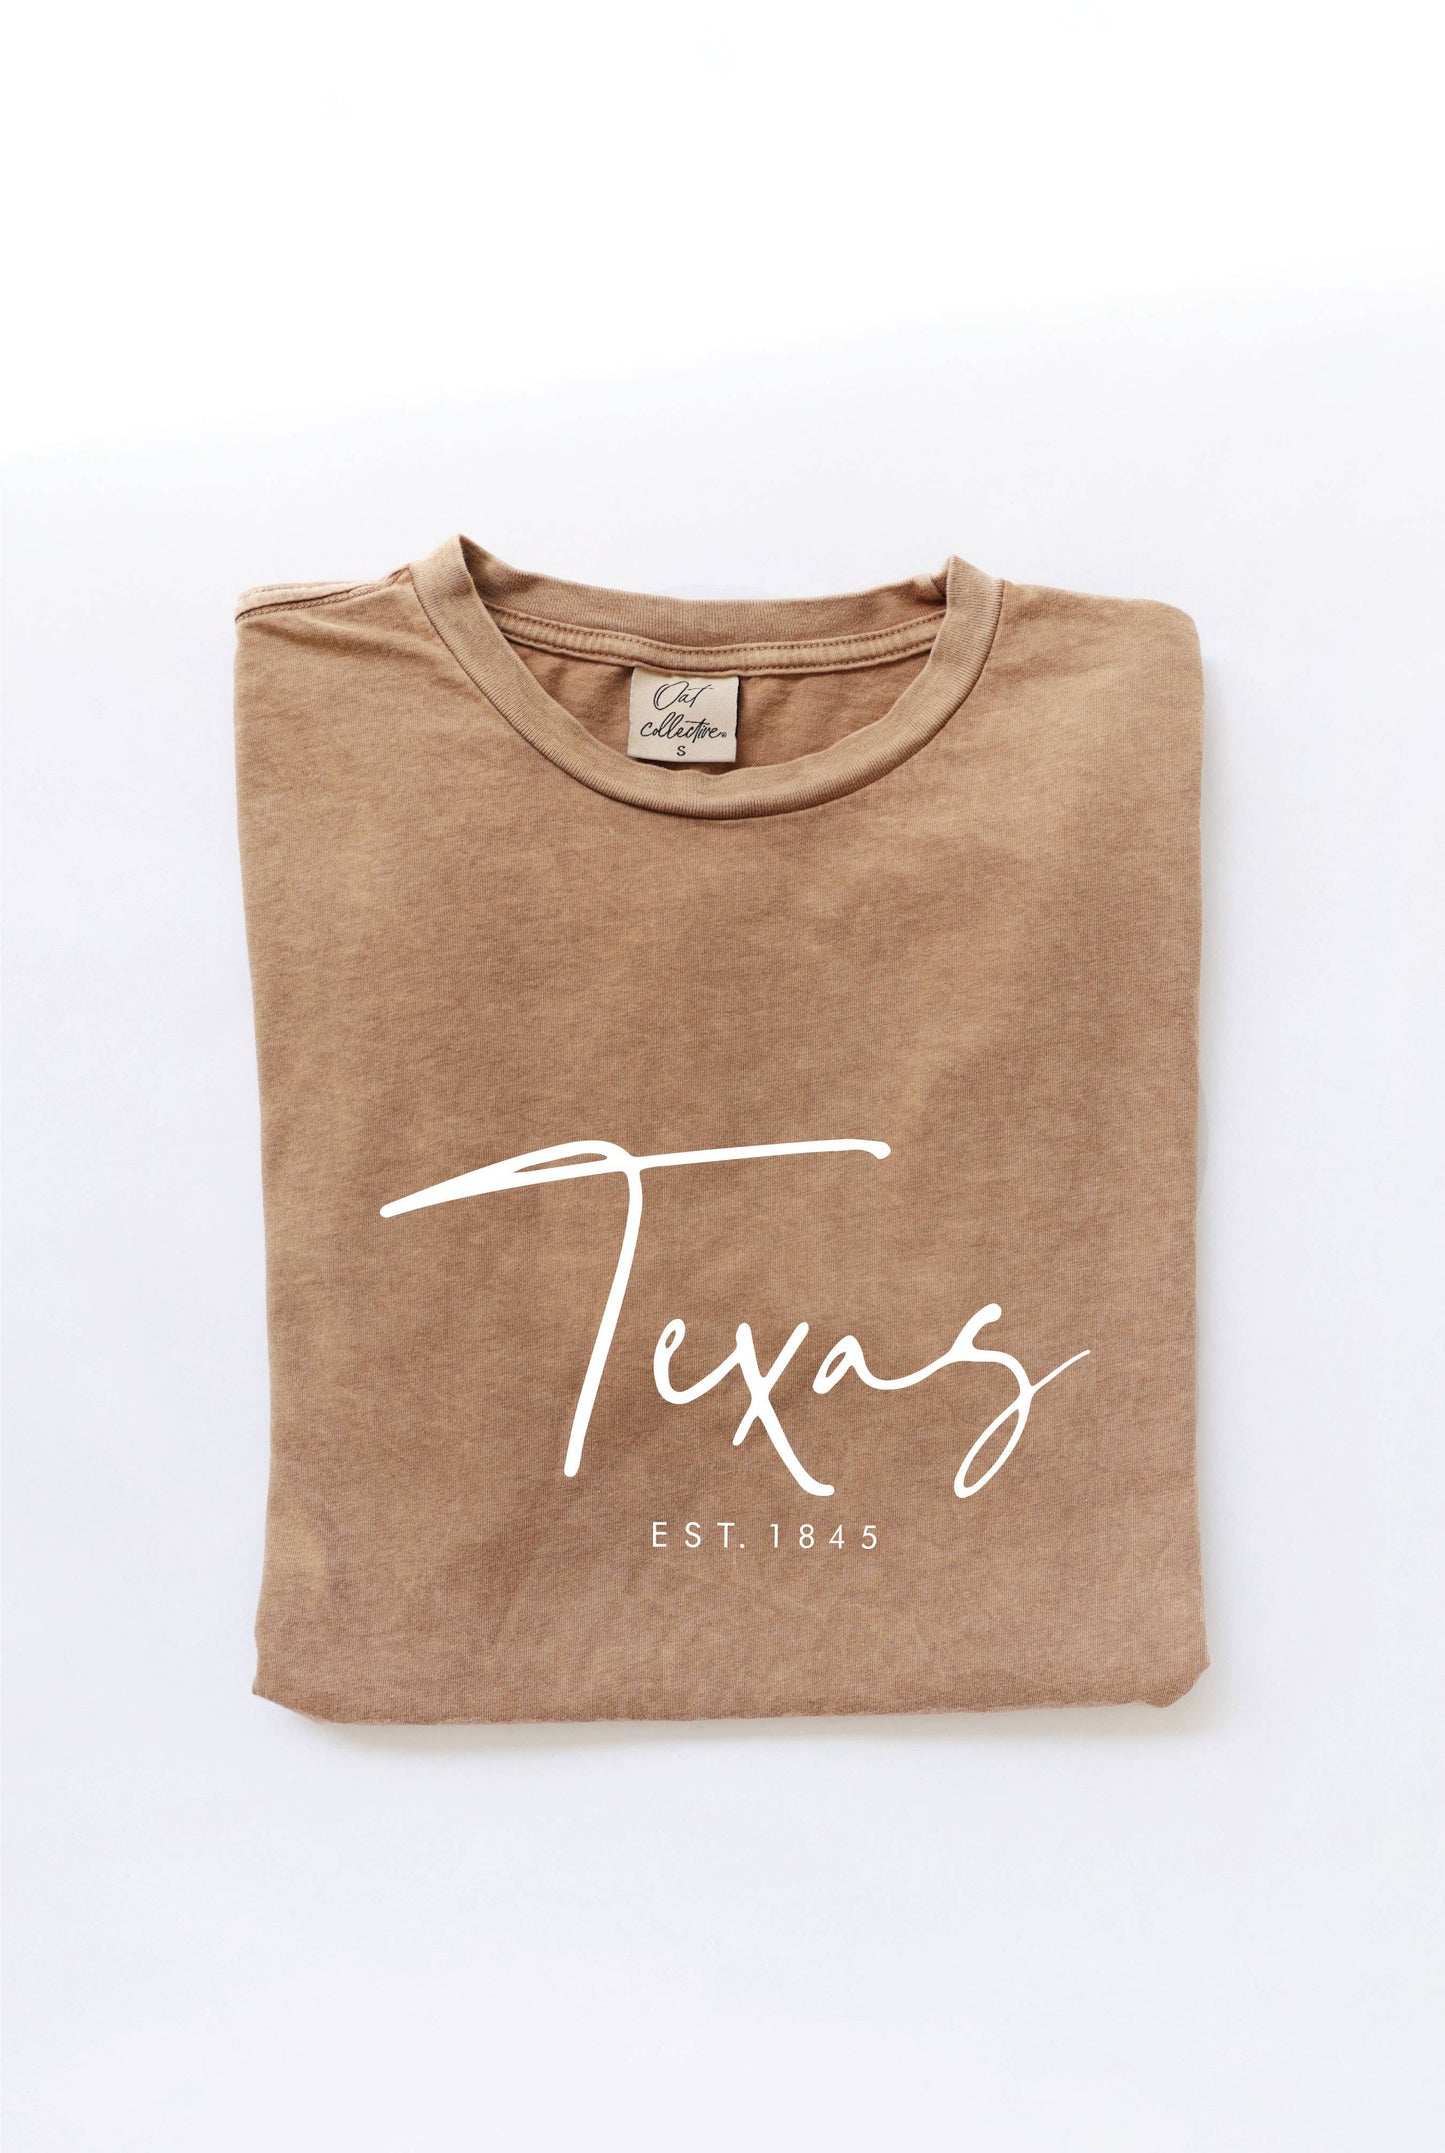 TEXAS EST. 1845 Mineral Washed Graphic Top